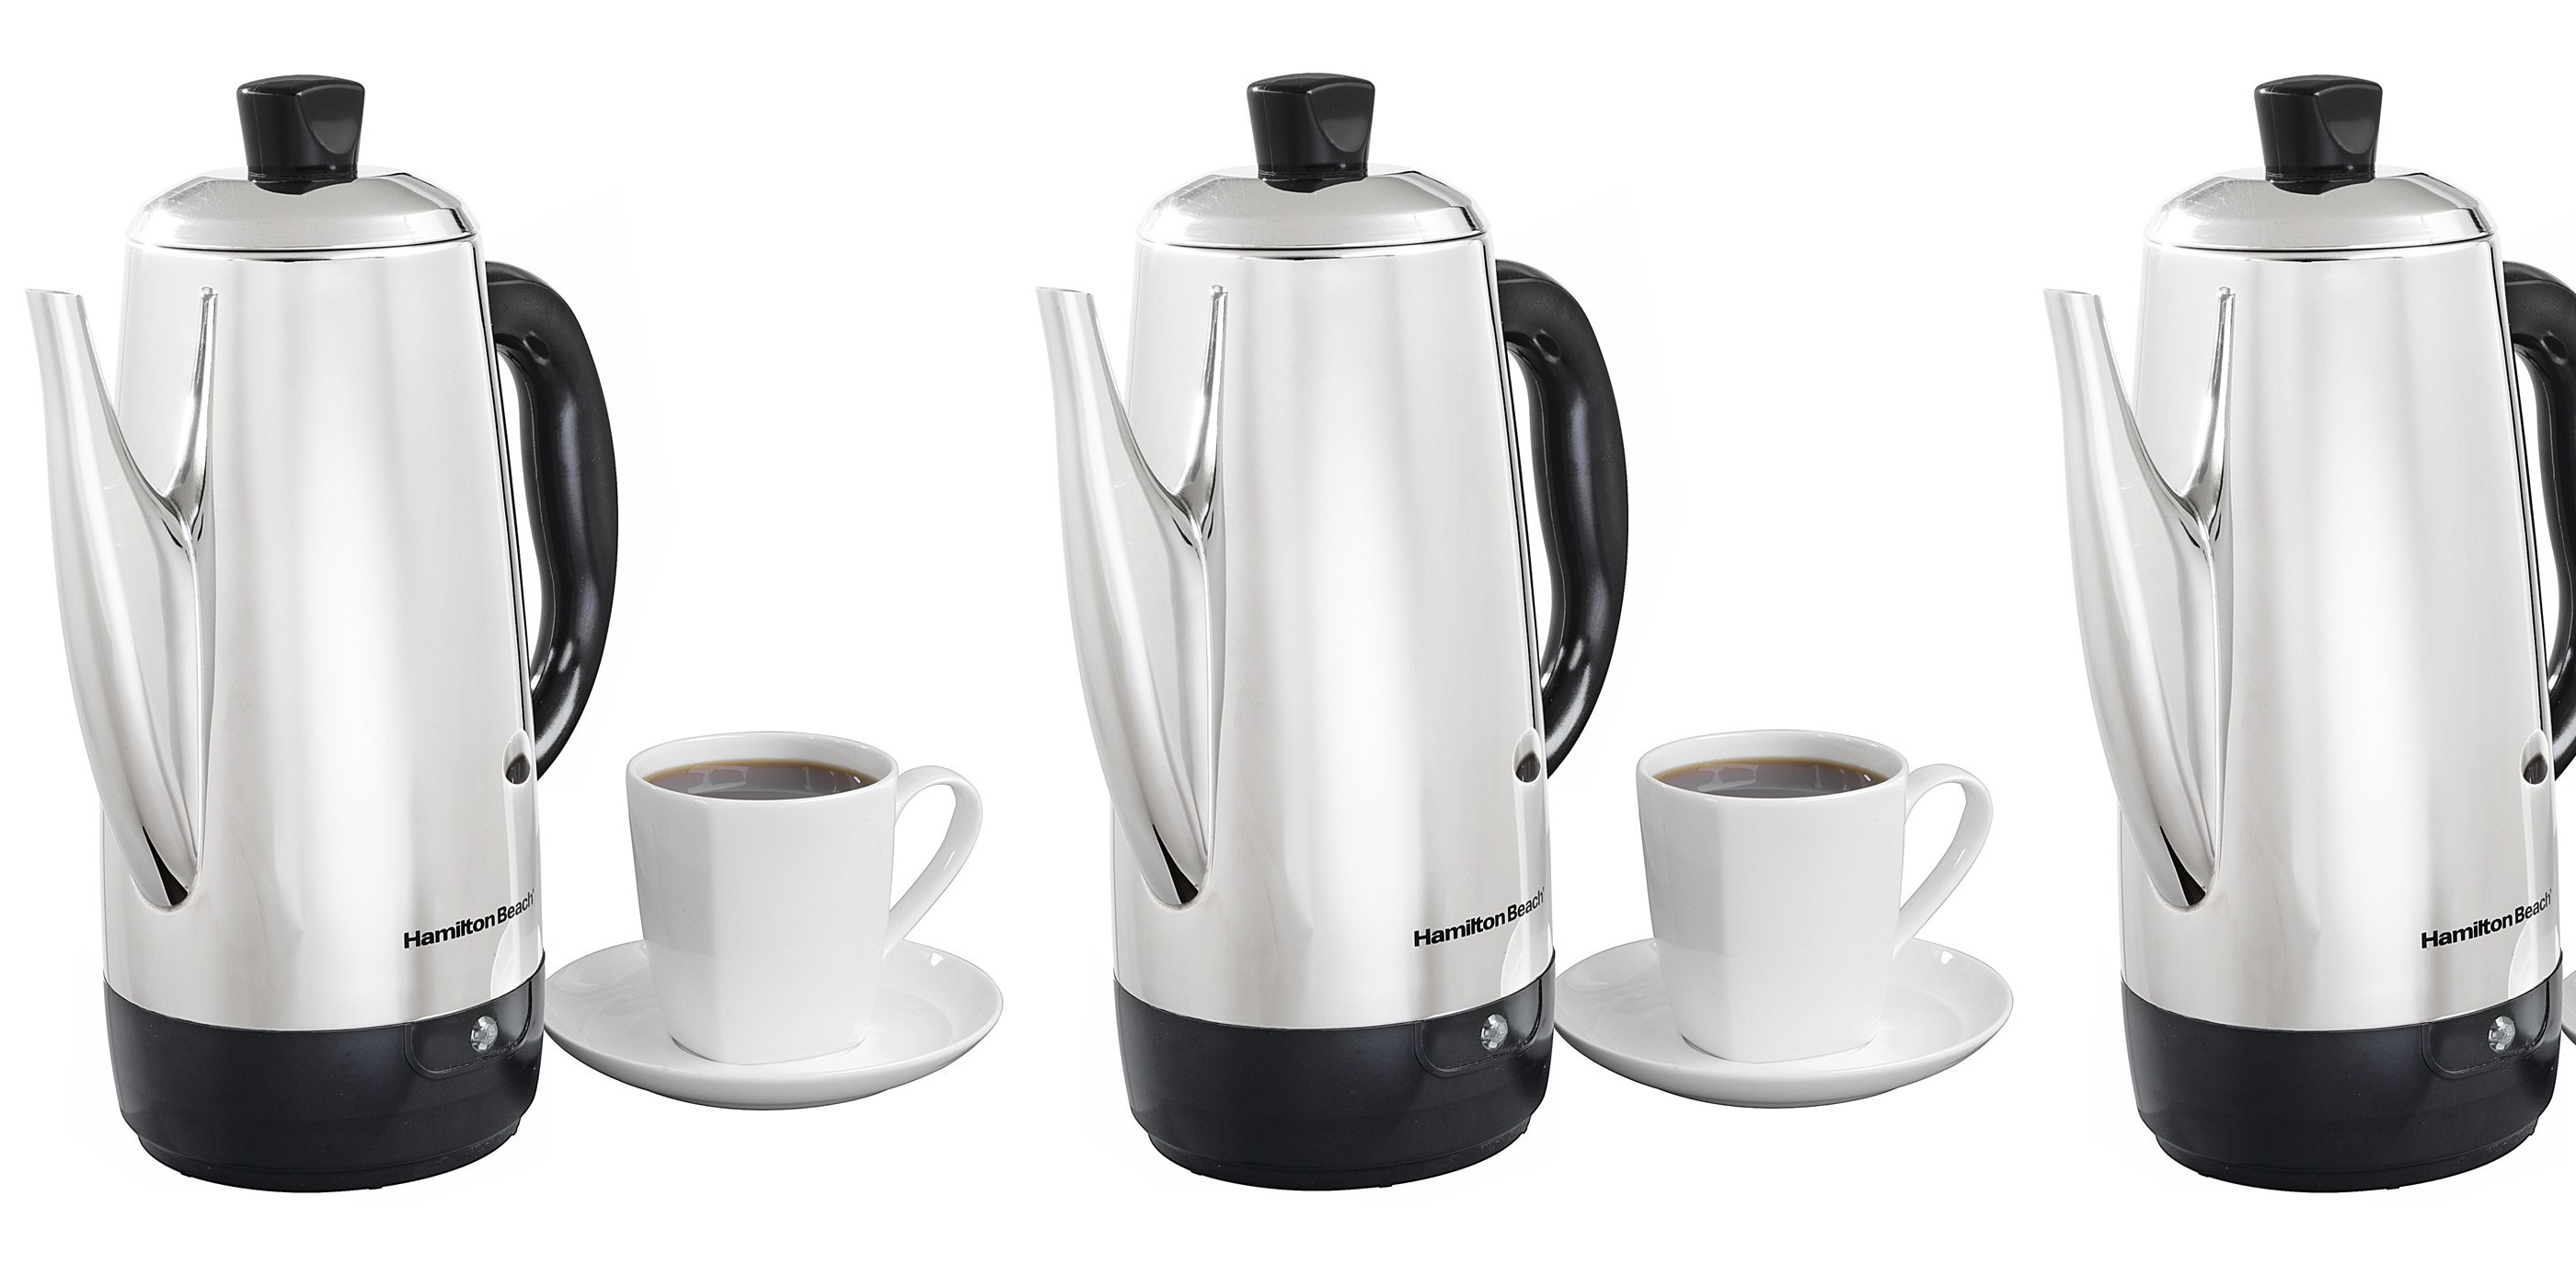 https://9to5toys.com/wp-content/uploads/sites/5/2017/05/hamilton-beach-stainless-steel-12-cup-electric-percolator.jpg